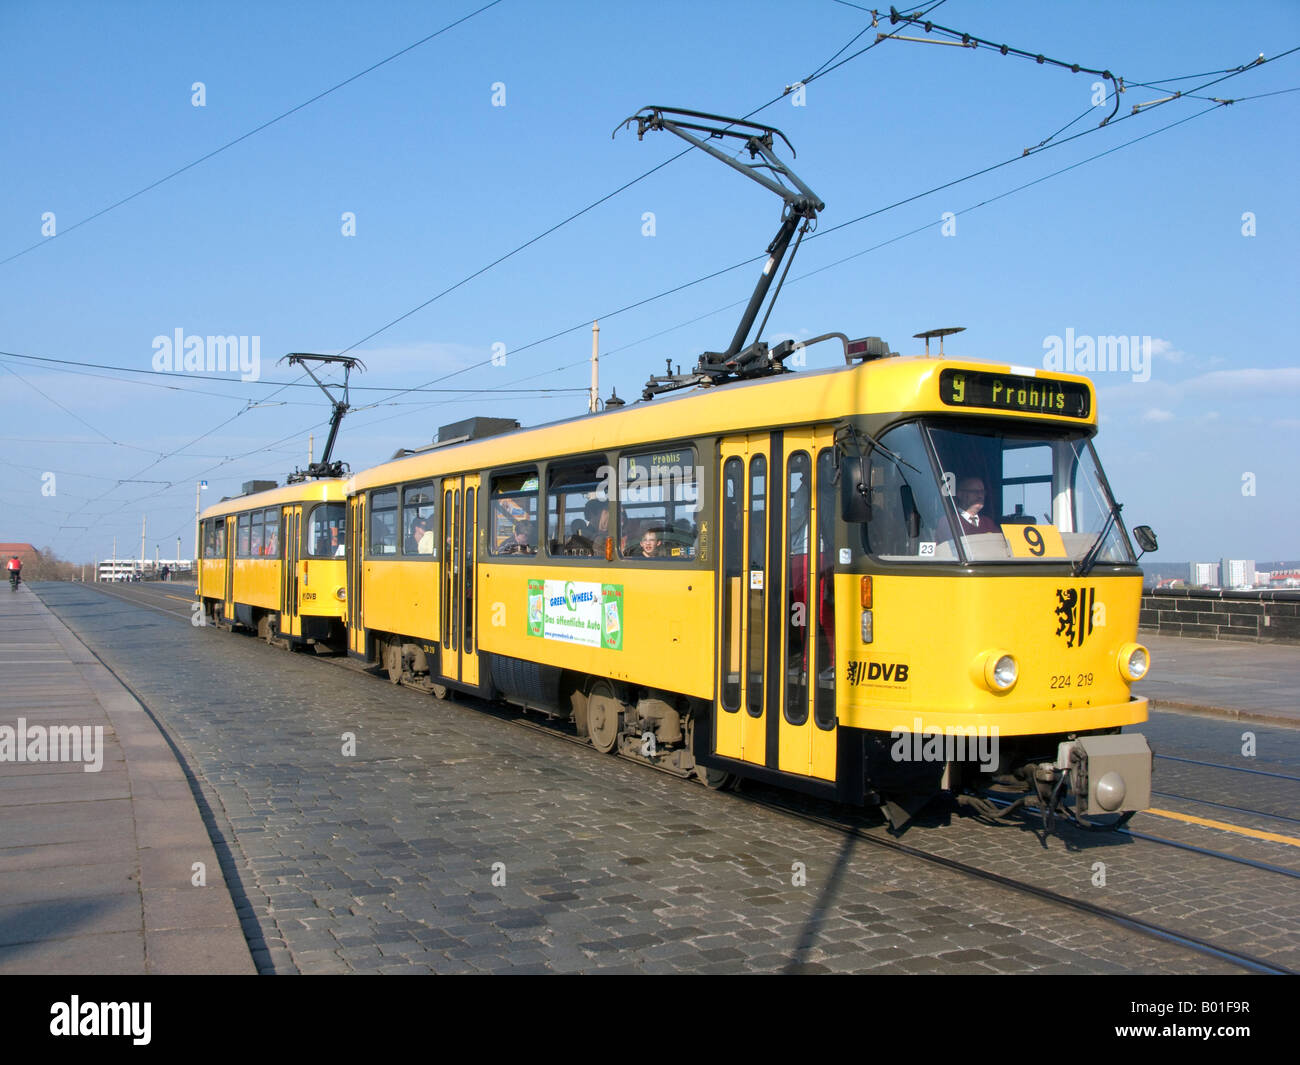 Moving Wheels Of Retro Tram Stock Photo - Download Image Now